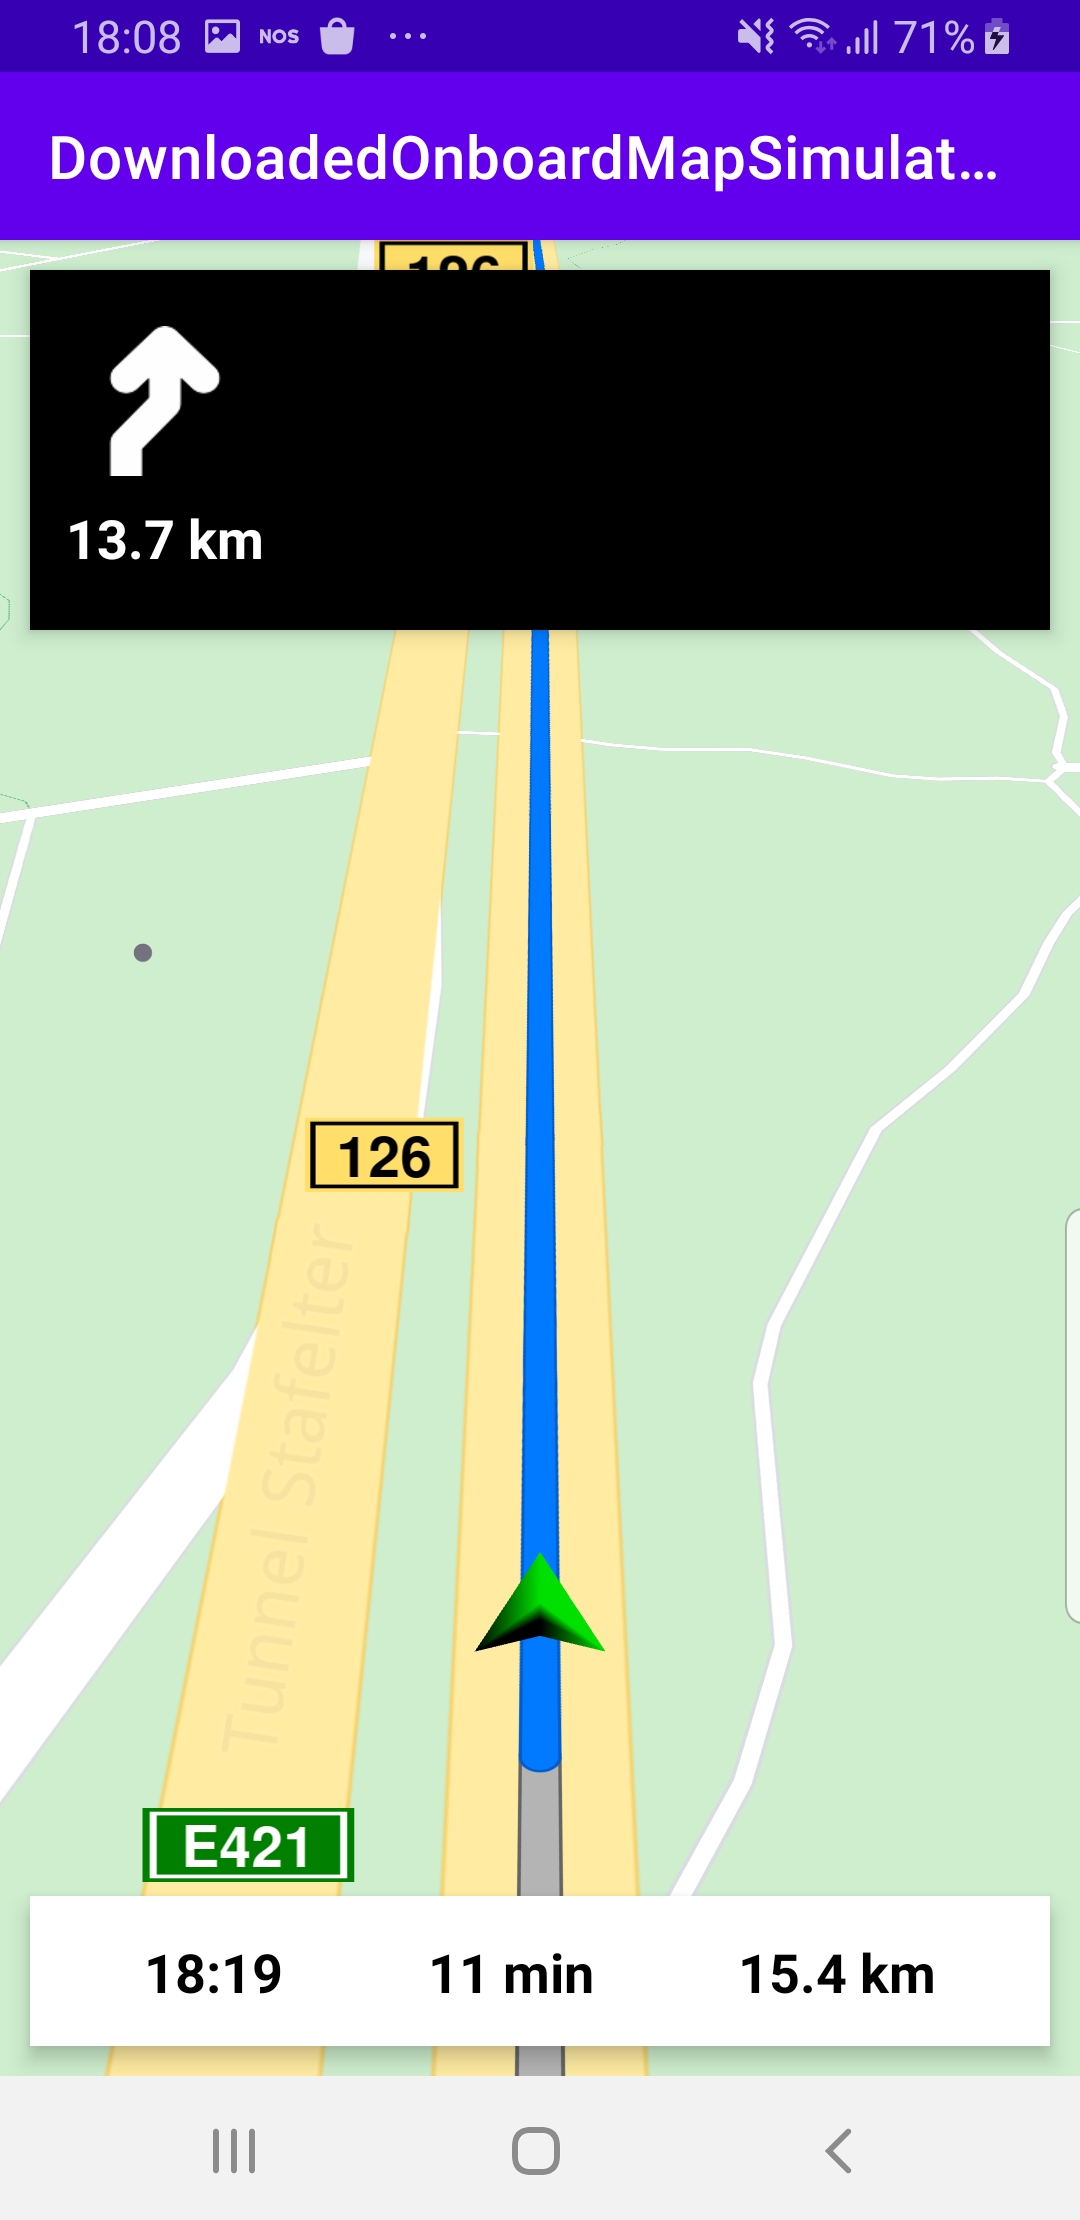 Map download example Android screenshot